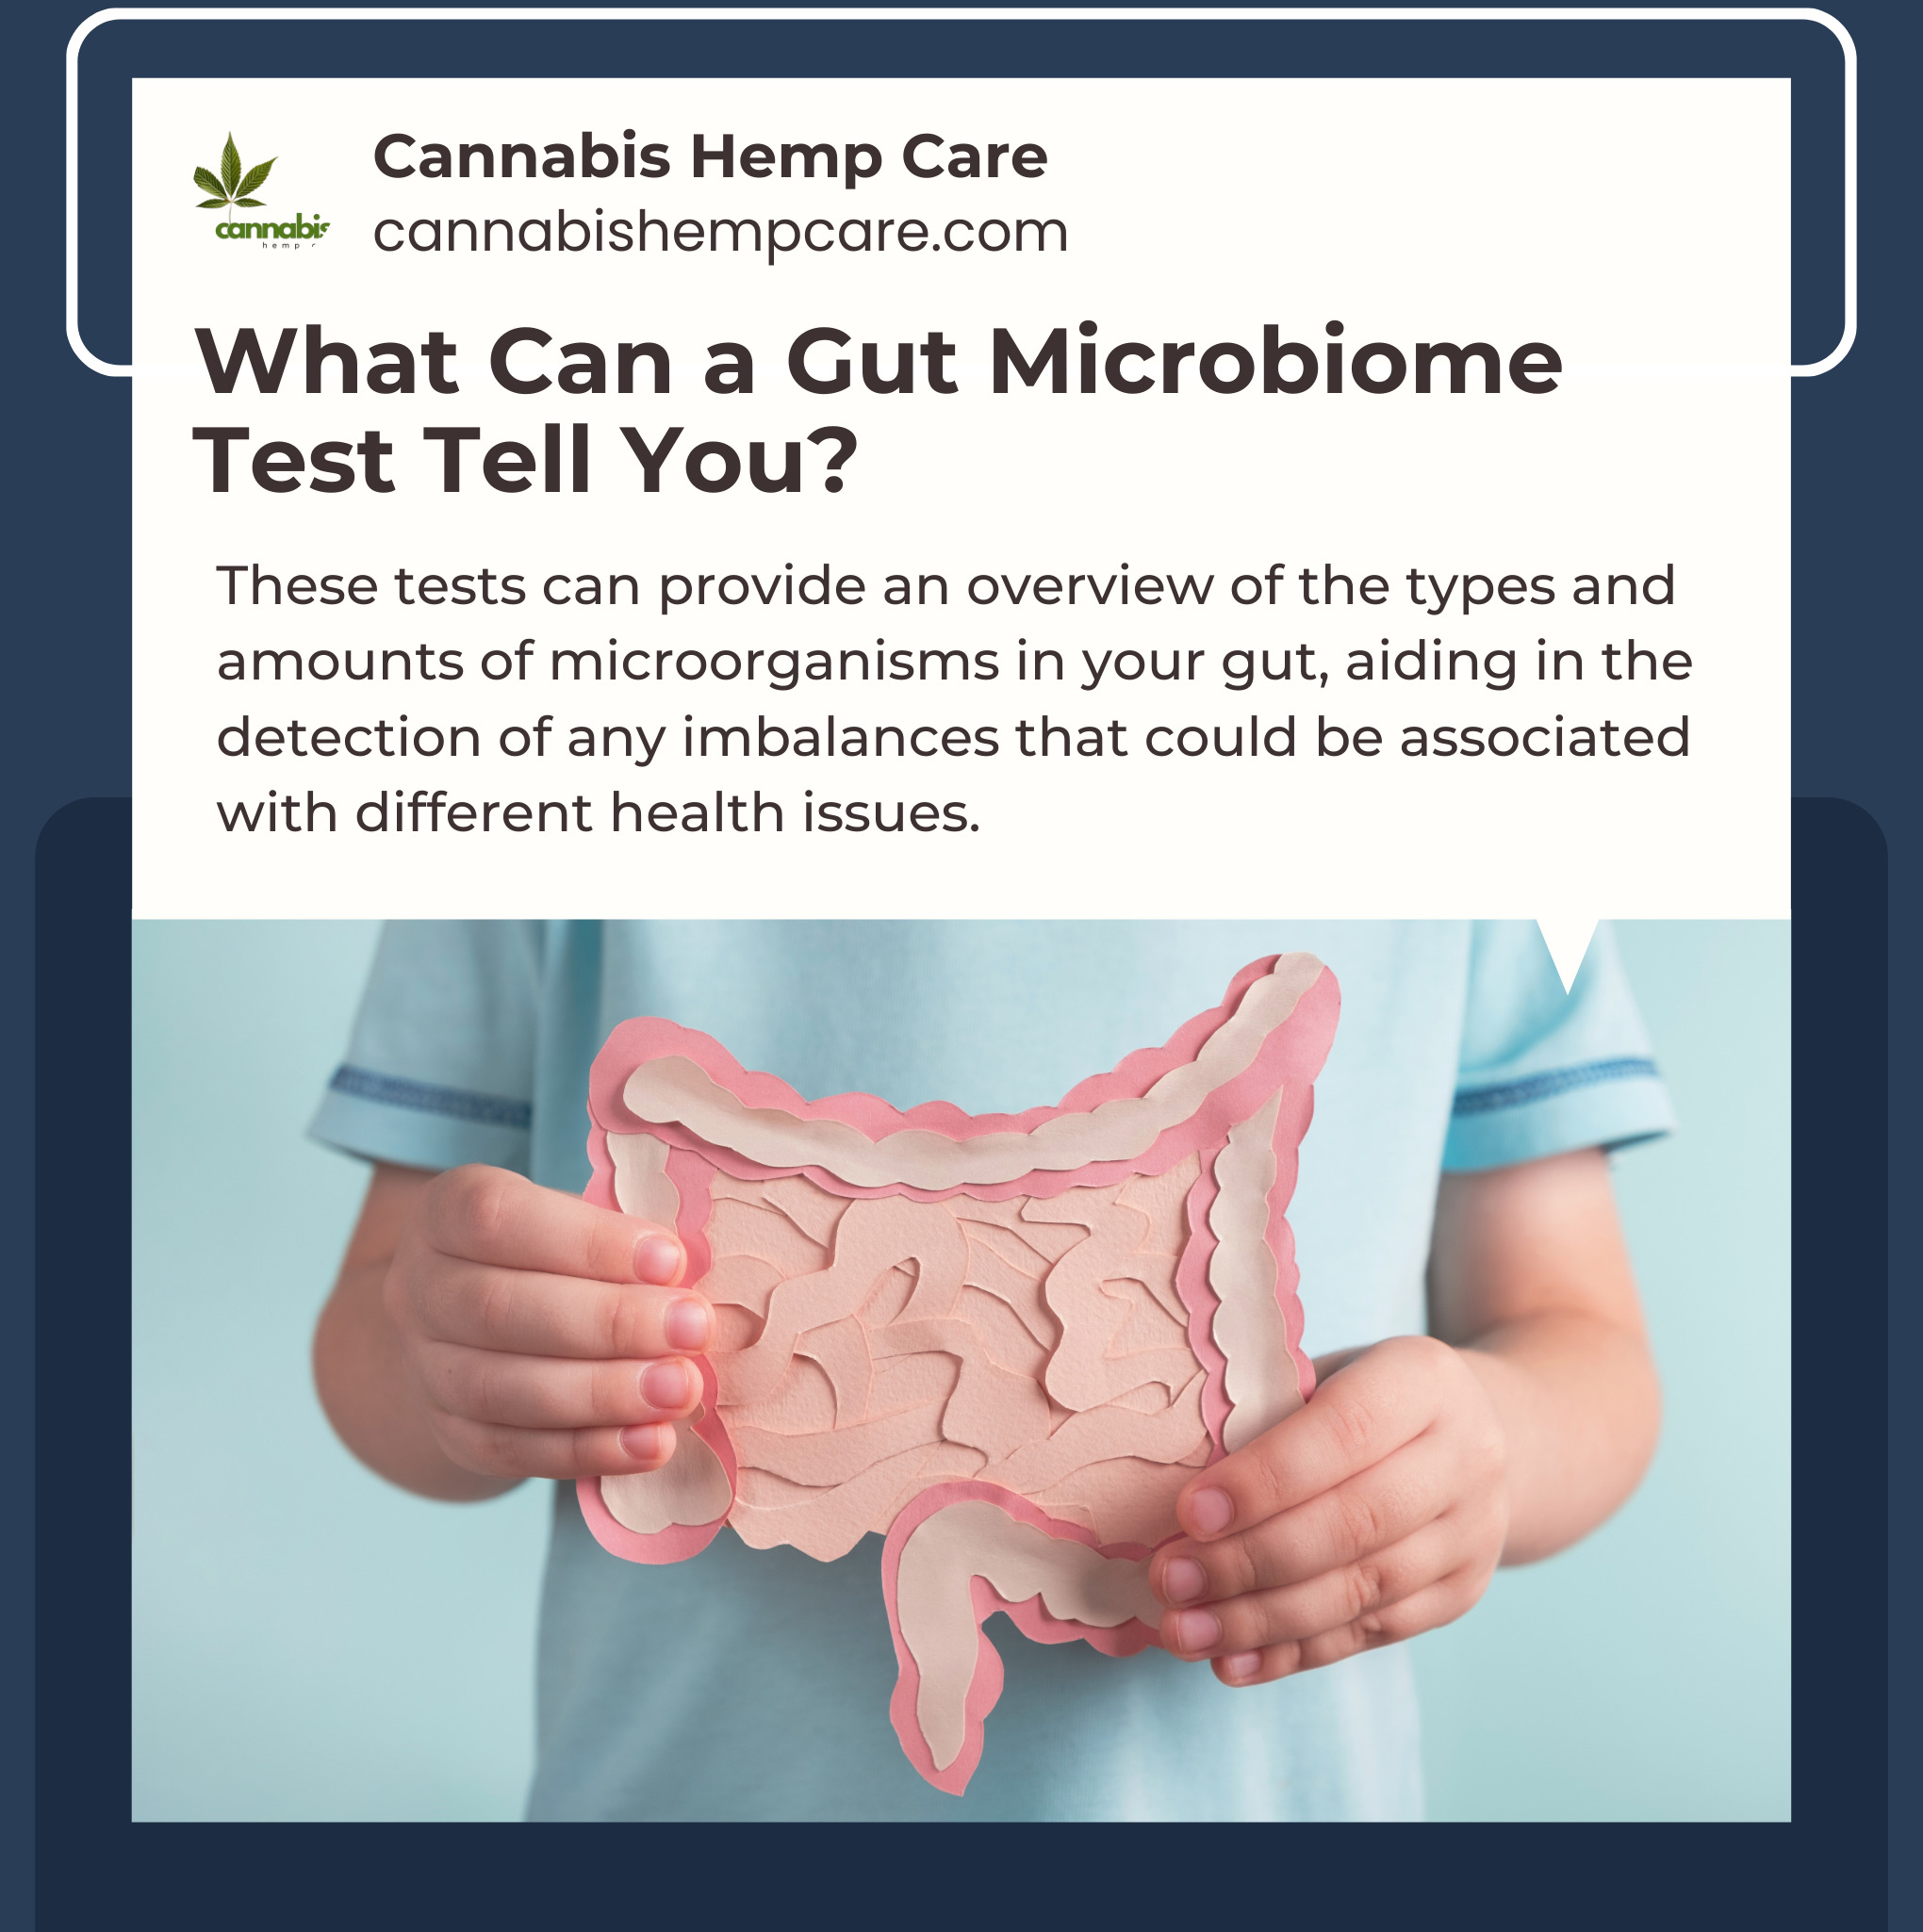 What Can a Gut Microbiome Test Tell You?